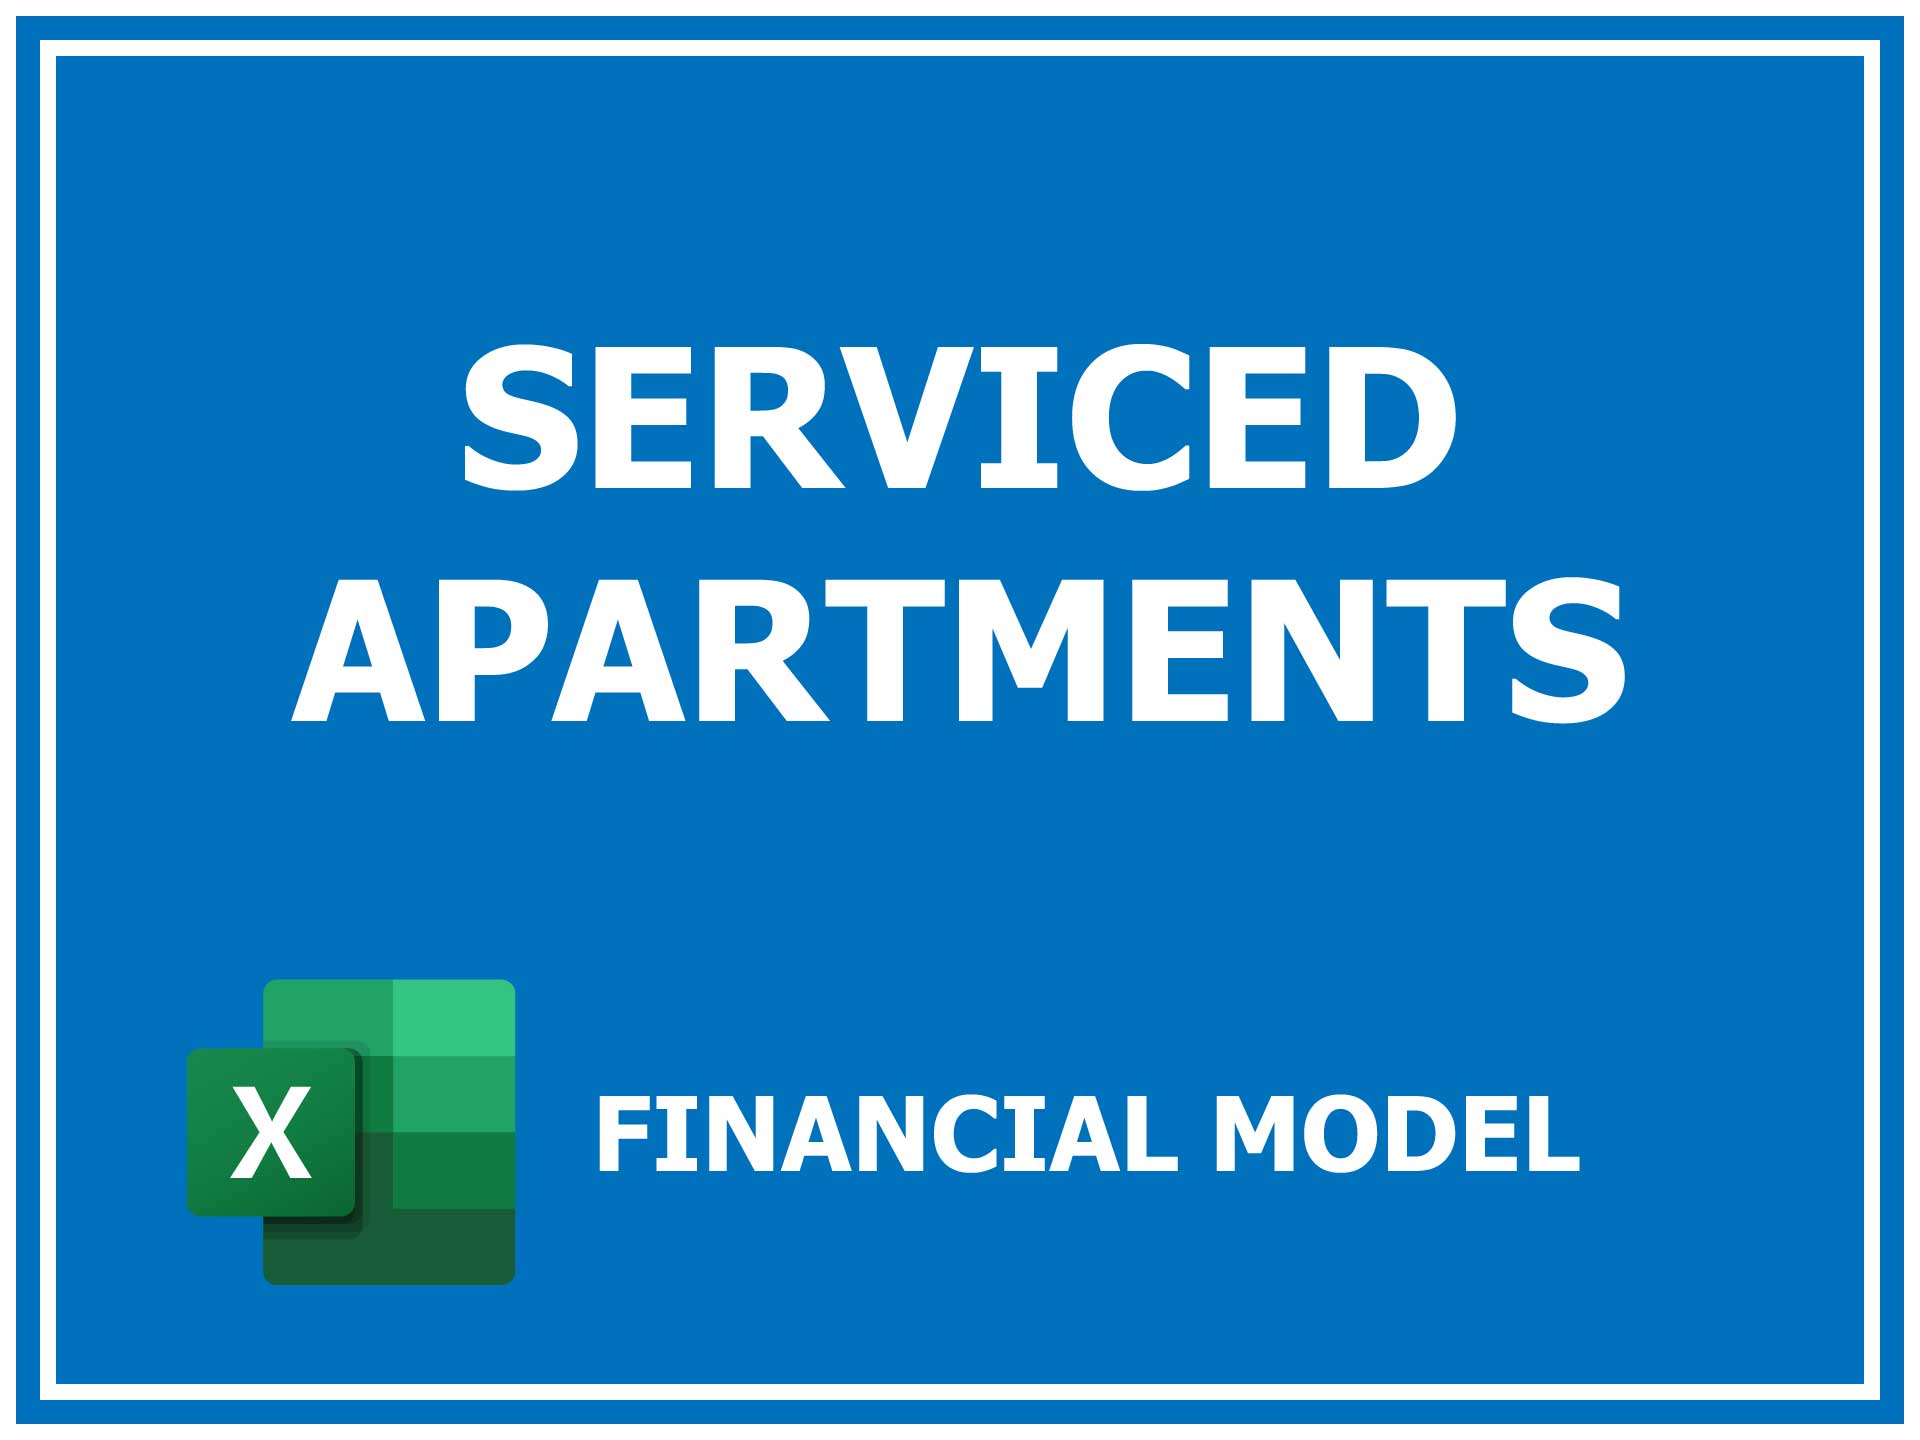 Serviced Apartments Business Plan Pitch Ready